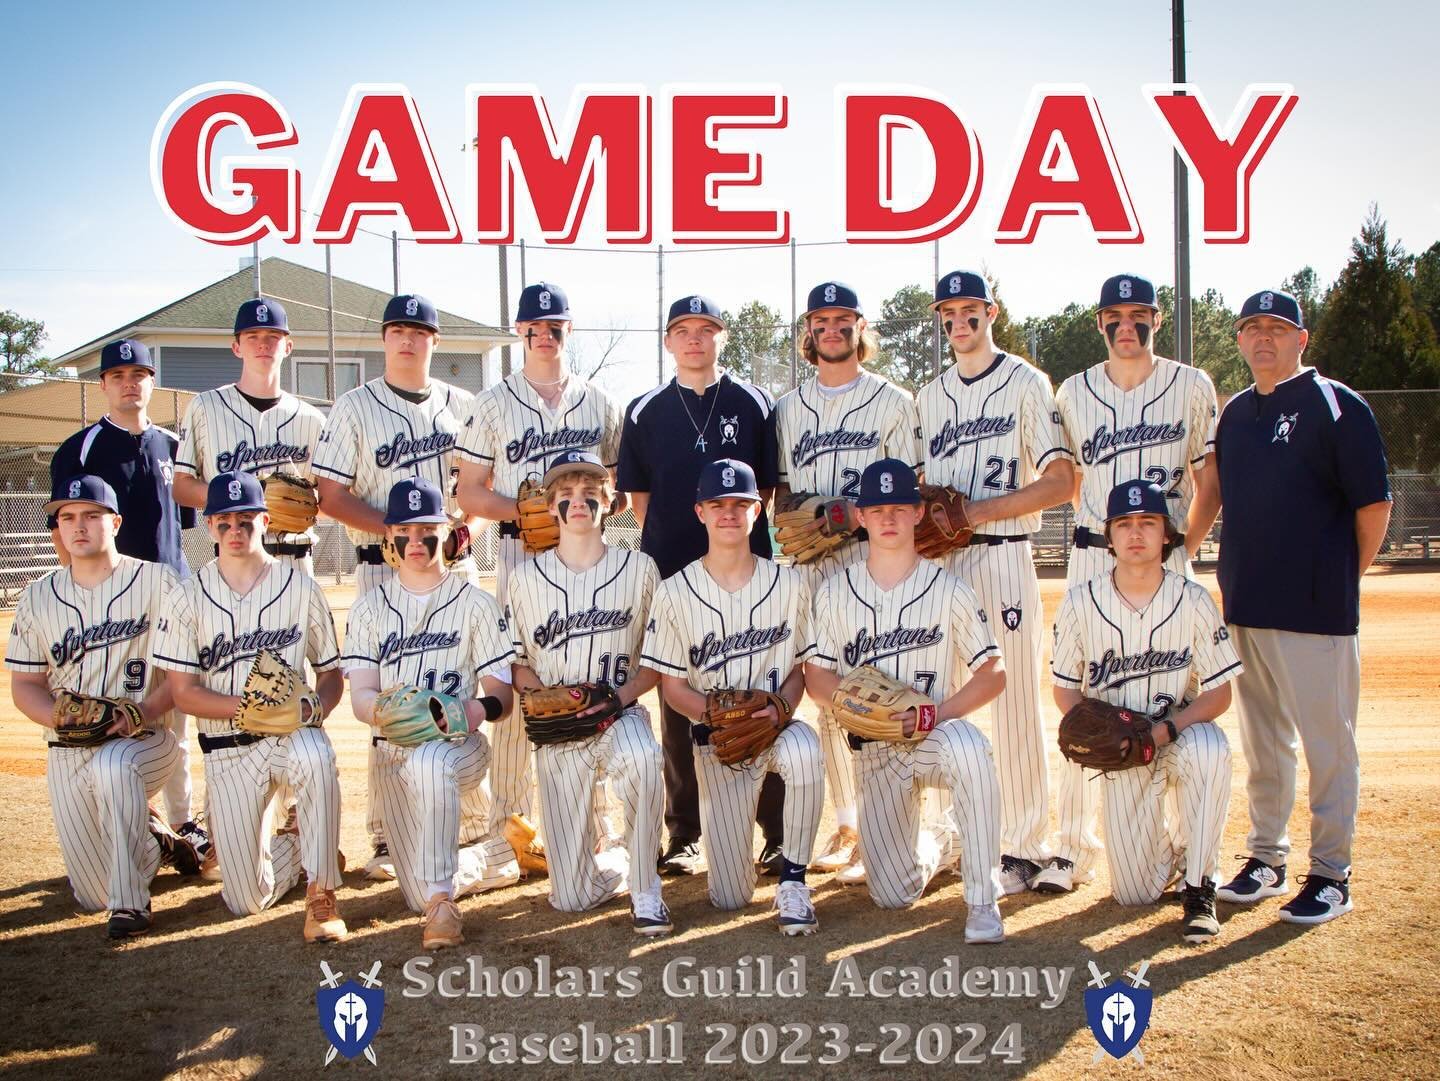 Come support your Spartans as they take on Creekside at 11am at West Walton&rsquo;s Legion Field this morning! Buy your tickets at the gate or in advance here: https://gofan.co/event/1339753?schoolId=GA87832 #spartans #baseball #gameday